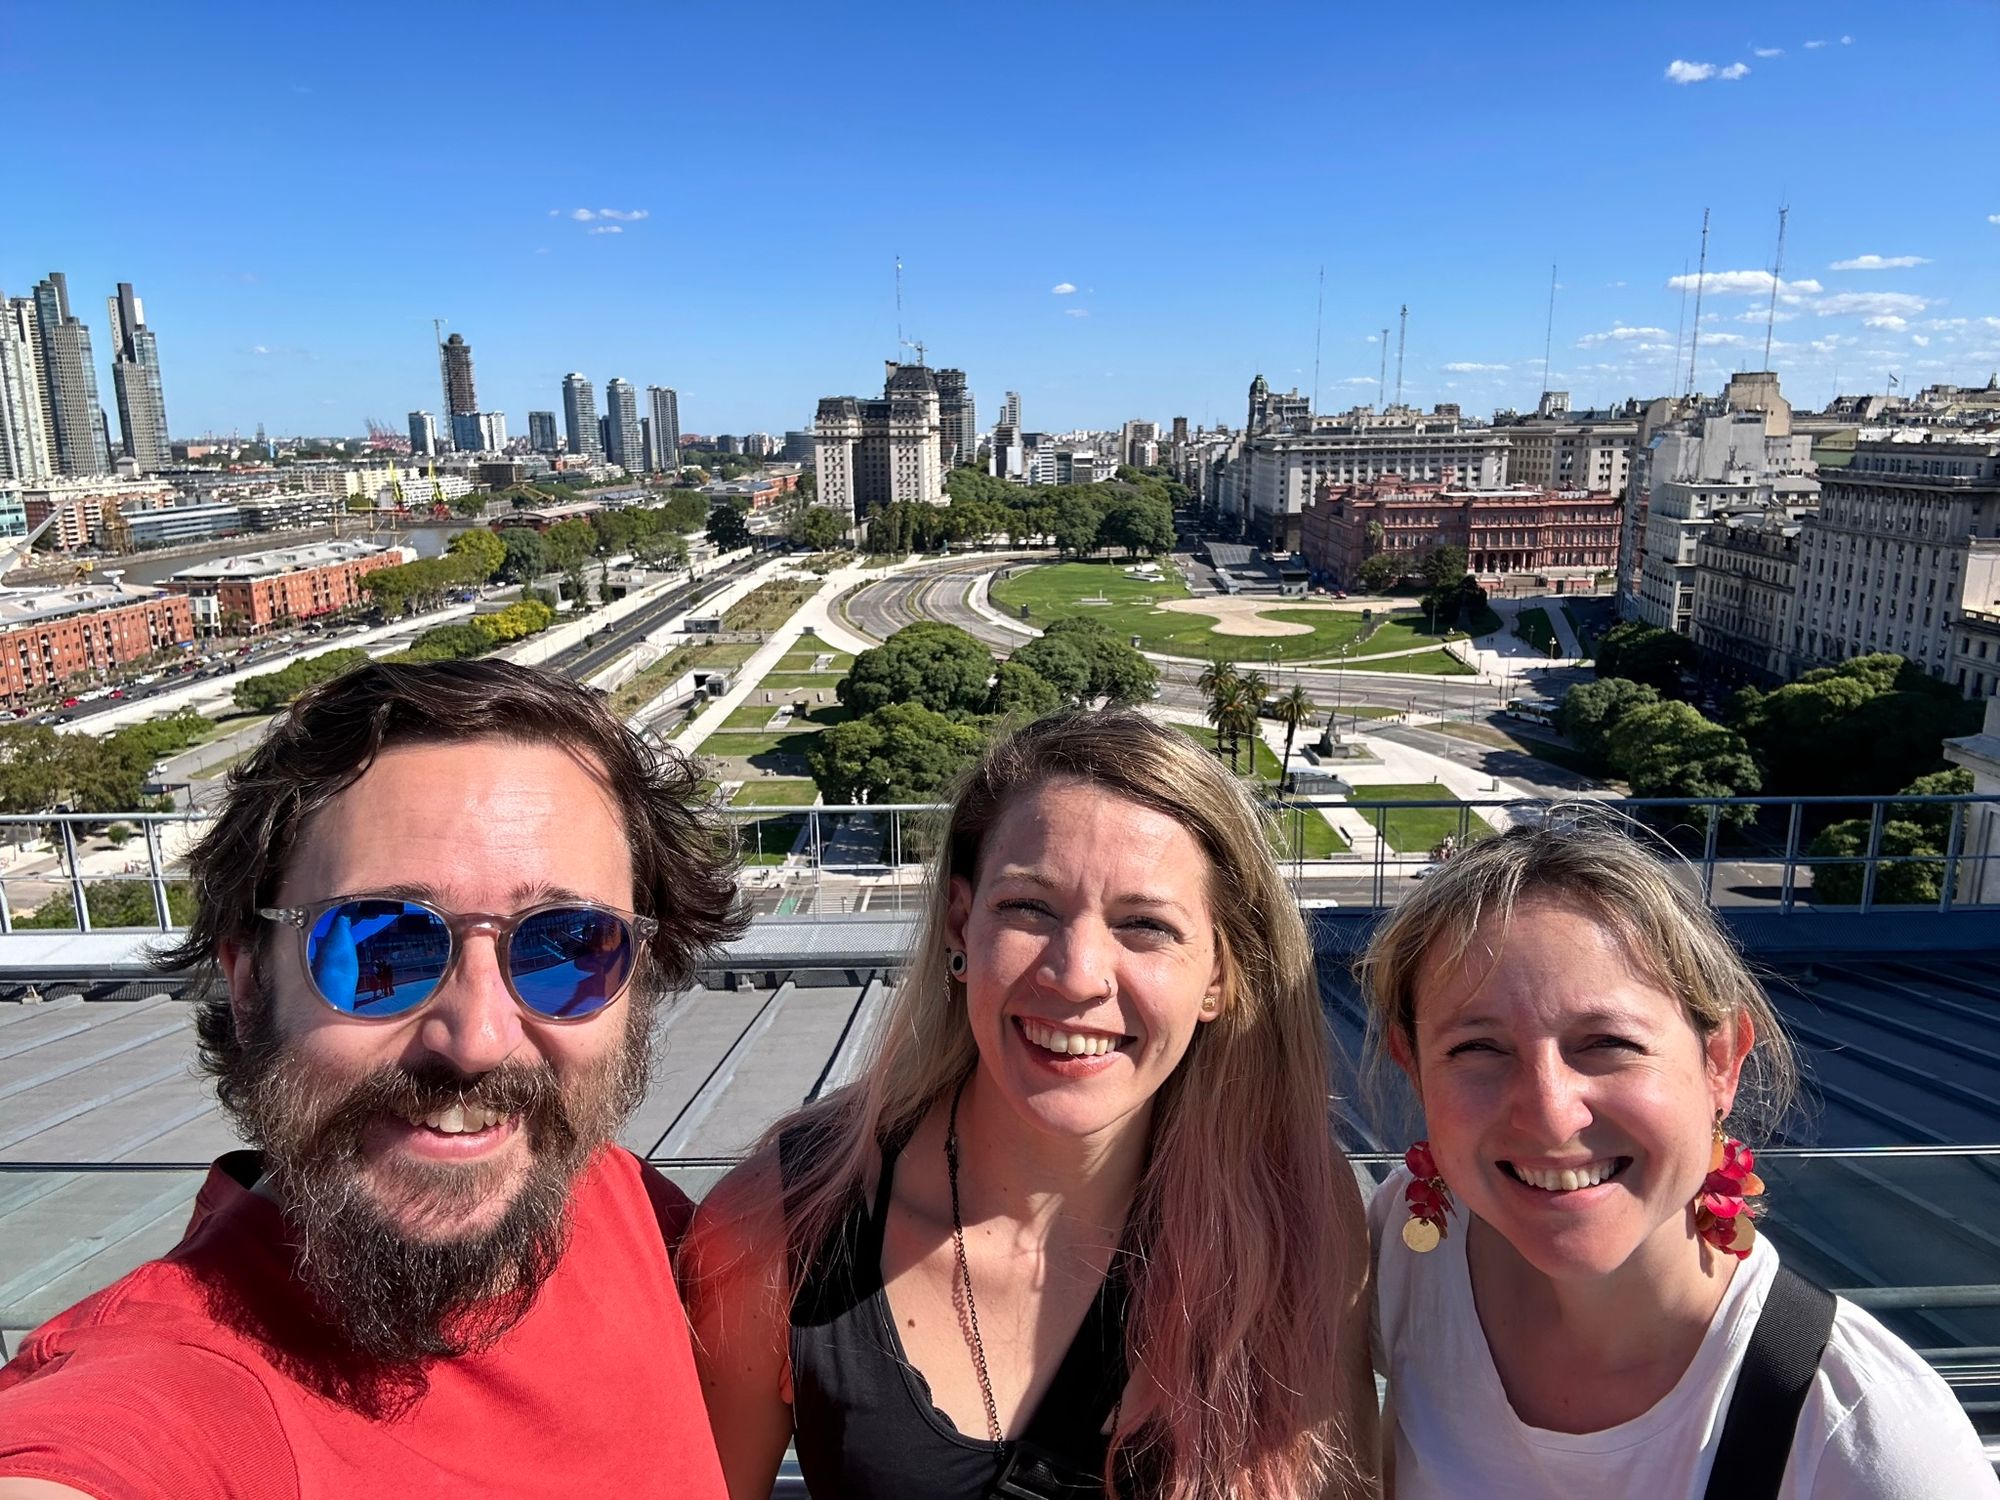 JP, Cheryl, and Yvette grinning in the sun on the top of the Kirchner cultural centre.